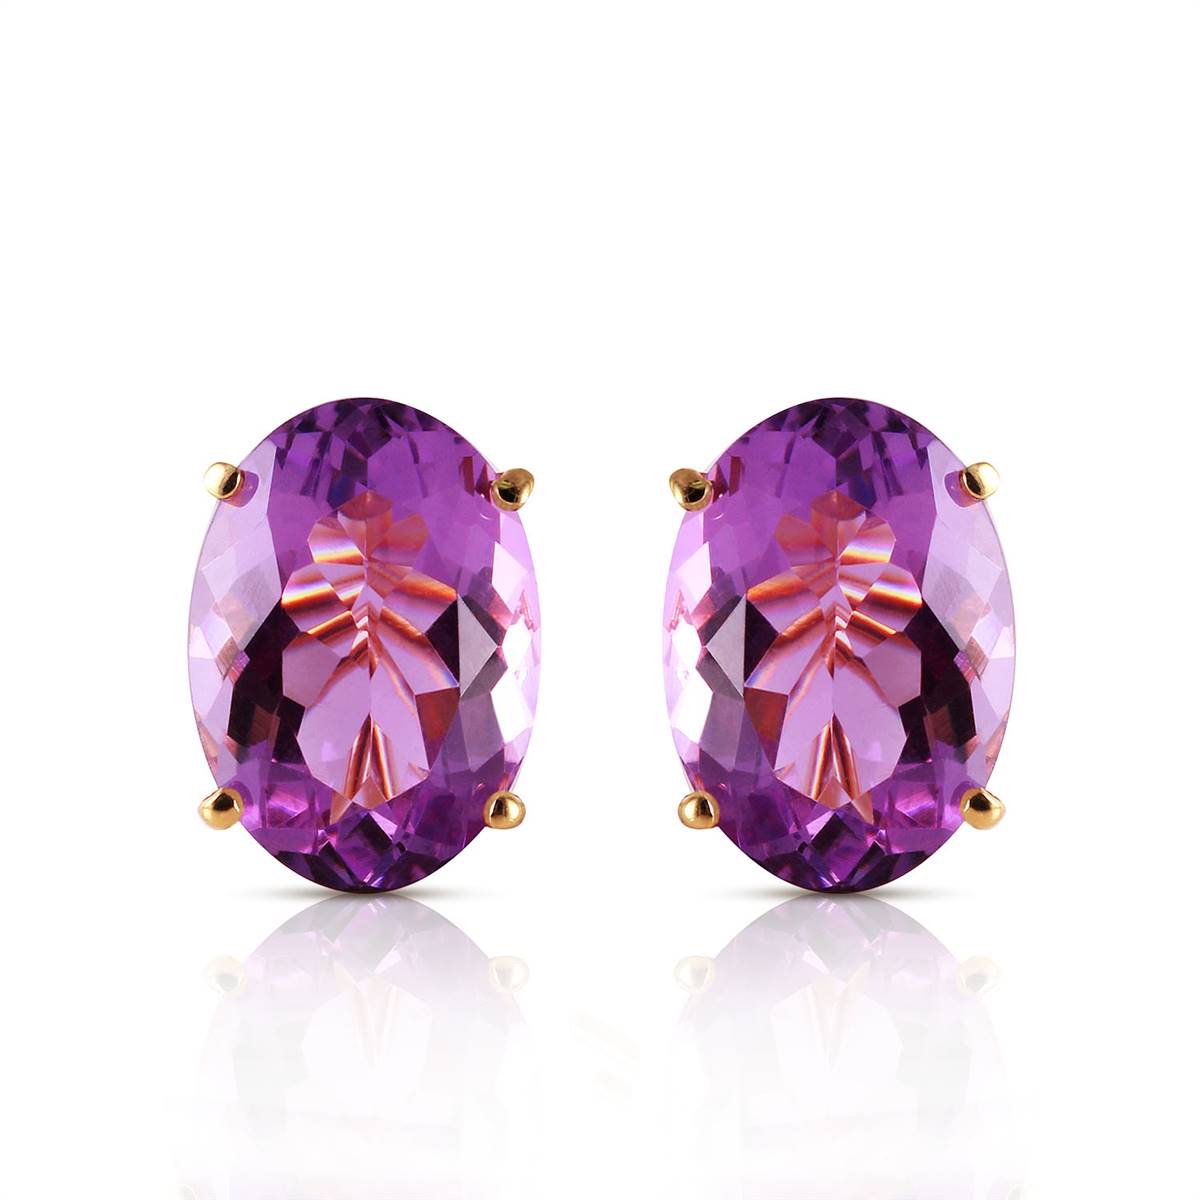 15.1 Carat 14K Solid Yellow Gold French Clips Earrings Natural Amethyst